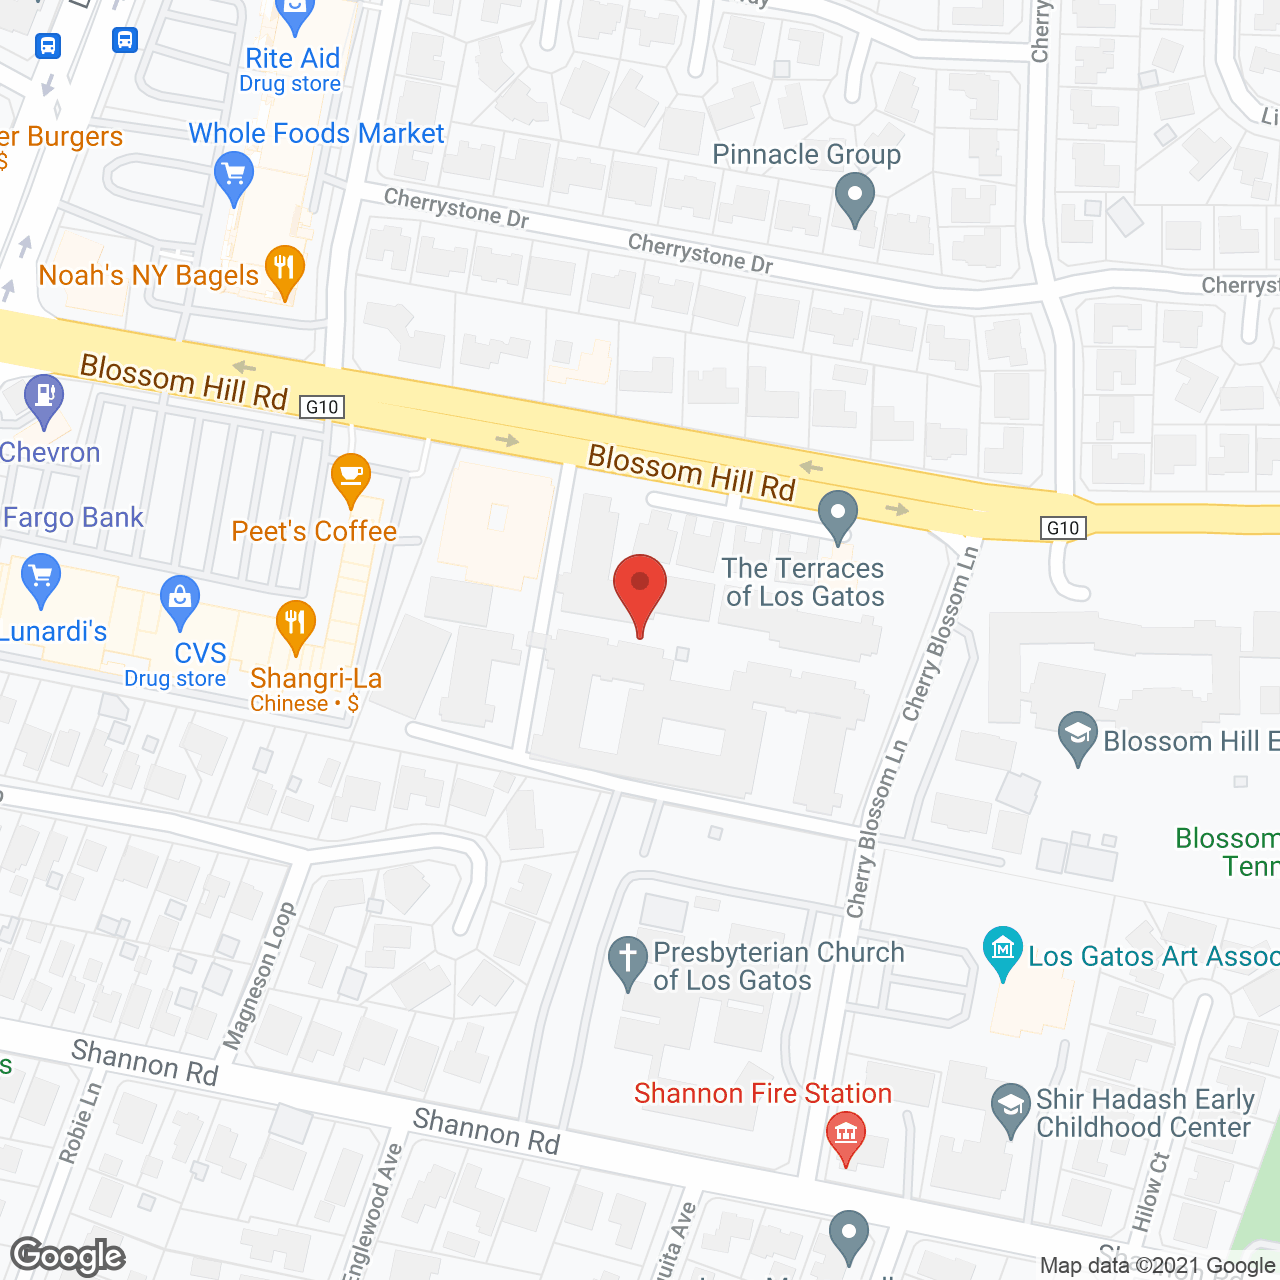 The Terraces of Los Gatos in google map